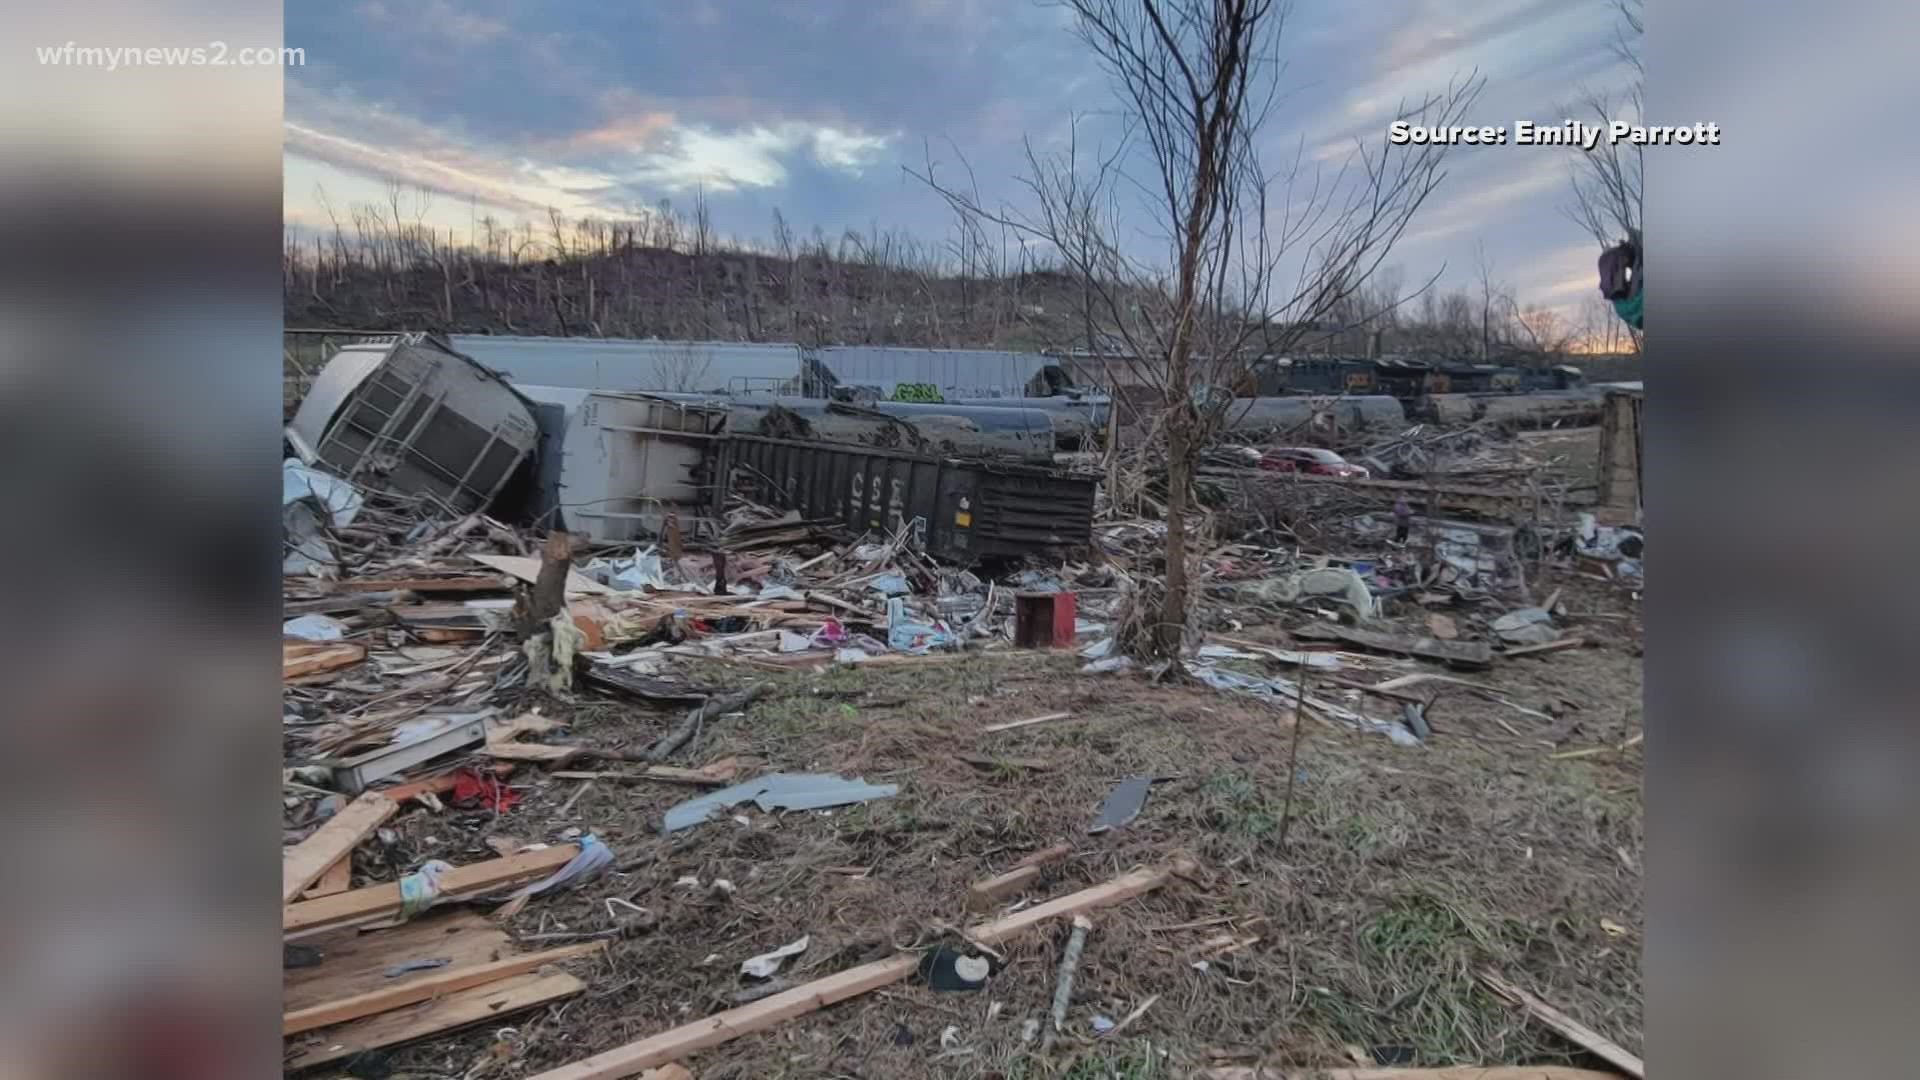 Emily Parrott was on the phone with her father in Dawson Springs, Kentucky when the tornado tore through the town.